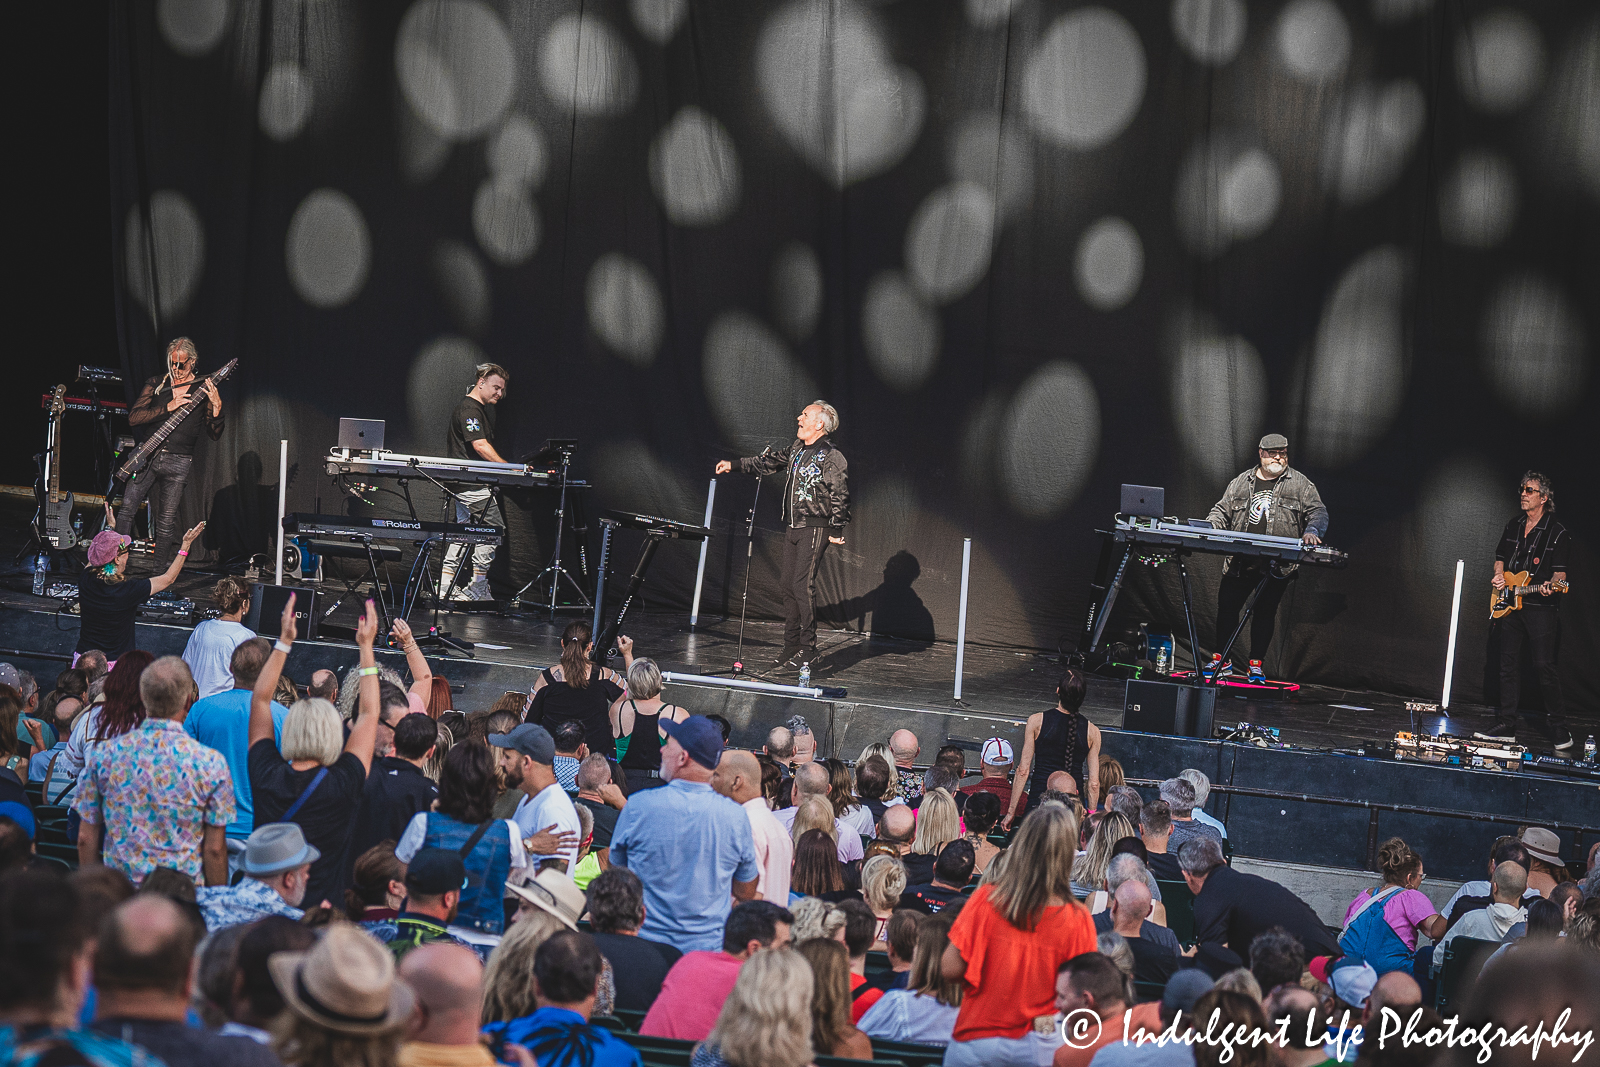 Live concert performance featuring Howard Jones at Starlight Theatre in Kansas City, MO on August 8, 2023.